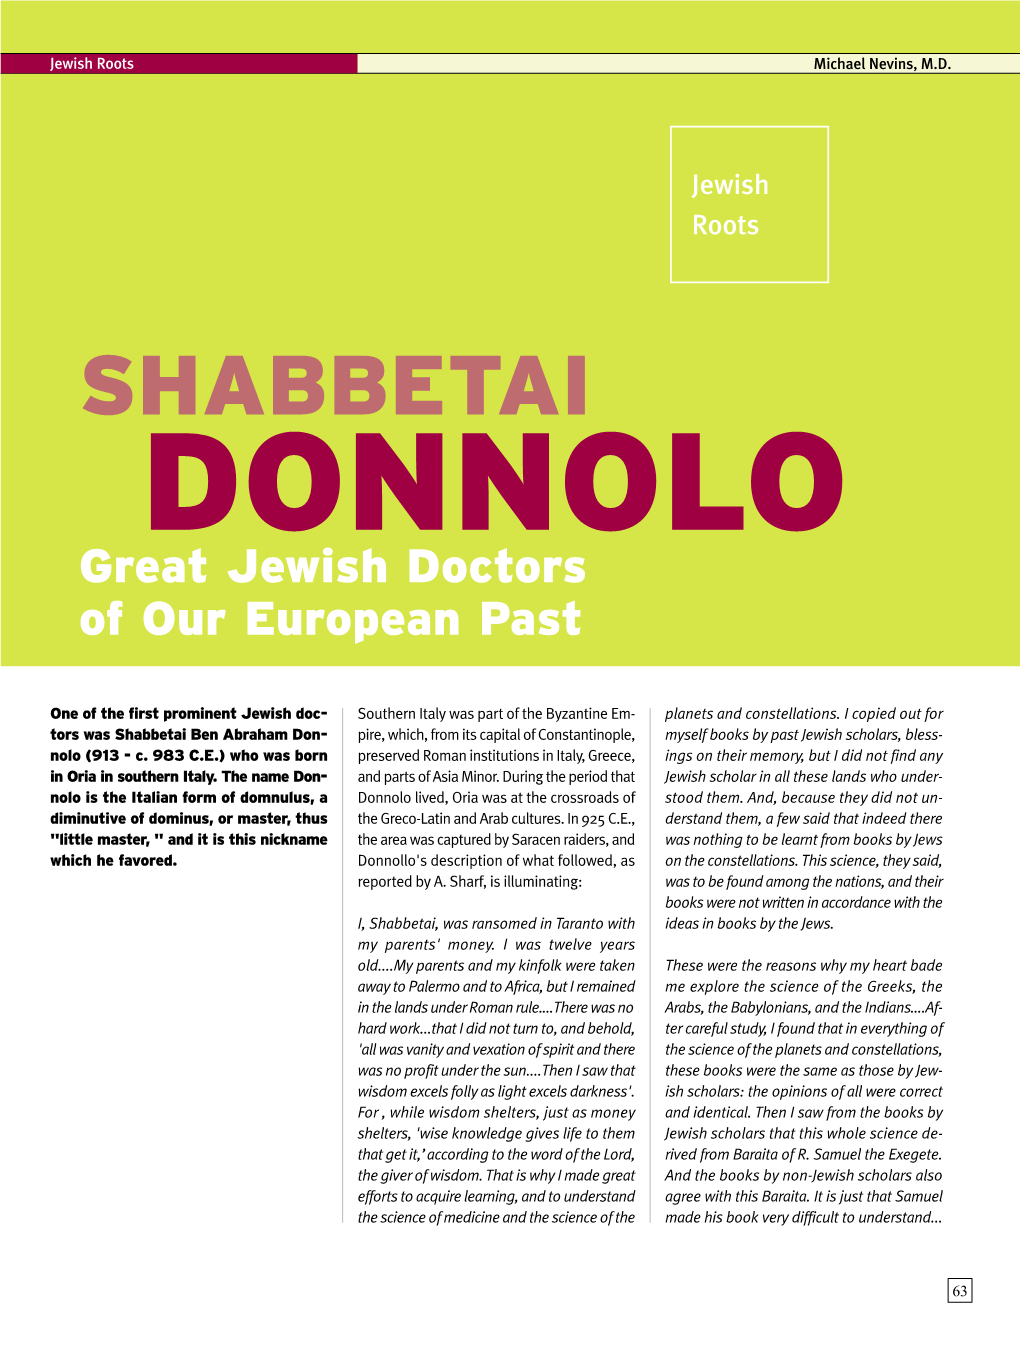 SHABBETAI DONNOLO Great Jewish Doctors of Our European Past